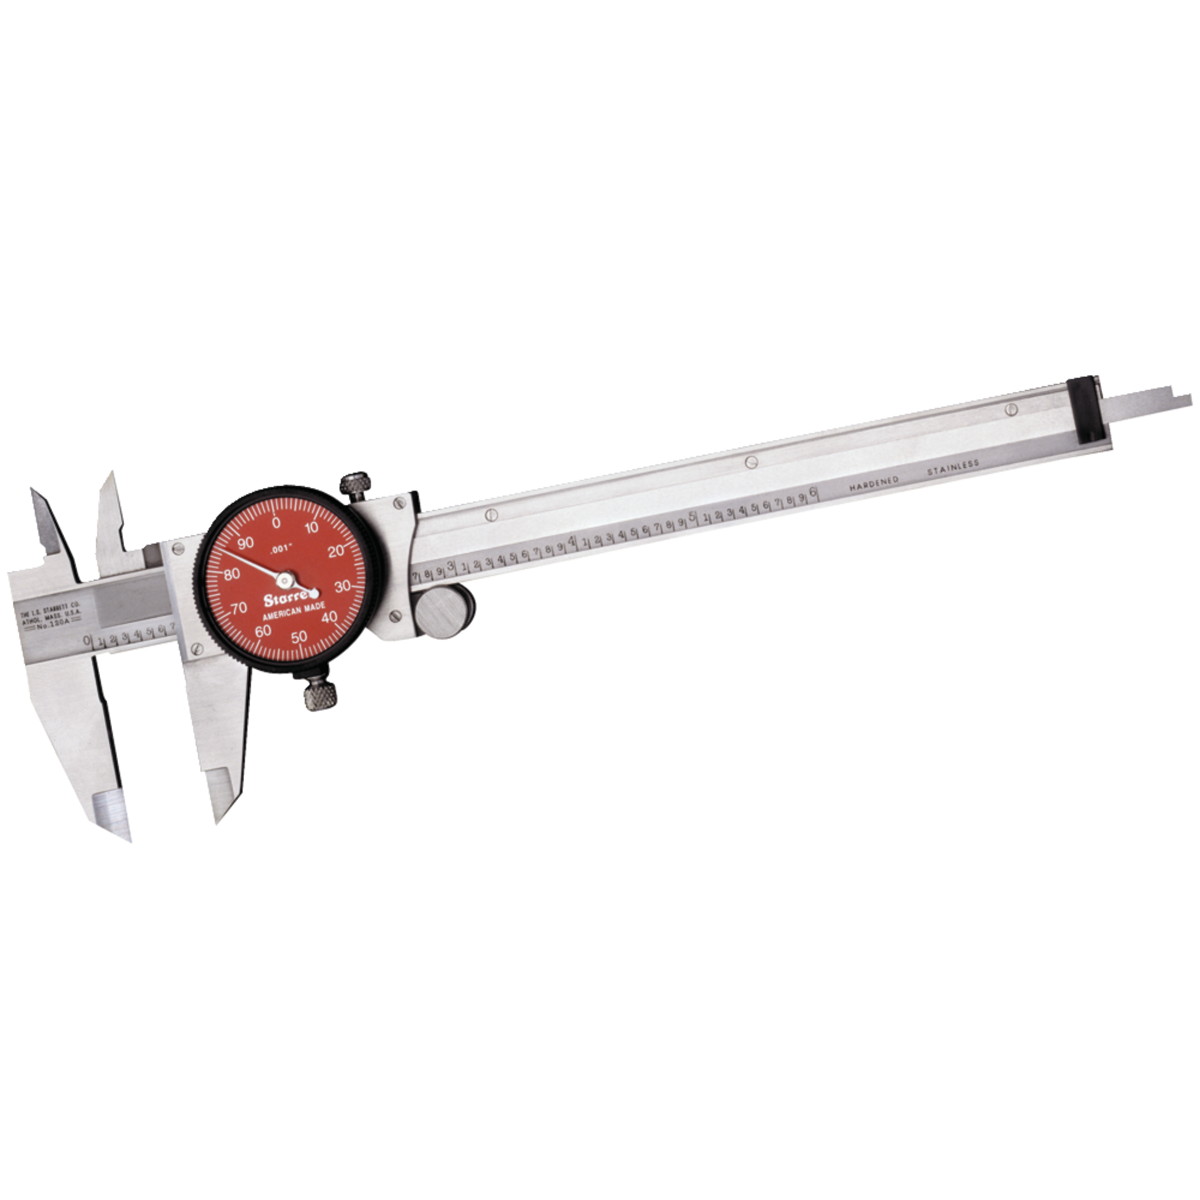 Picture of Starrett R120A-6 6 in. Hardened Stainless Steel Dial Caliper